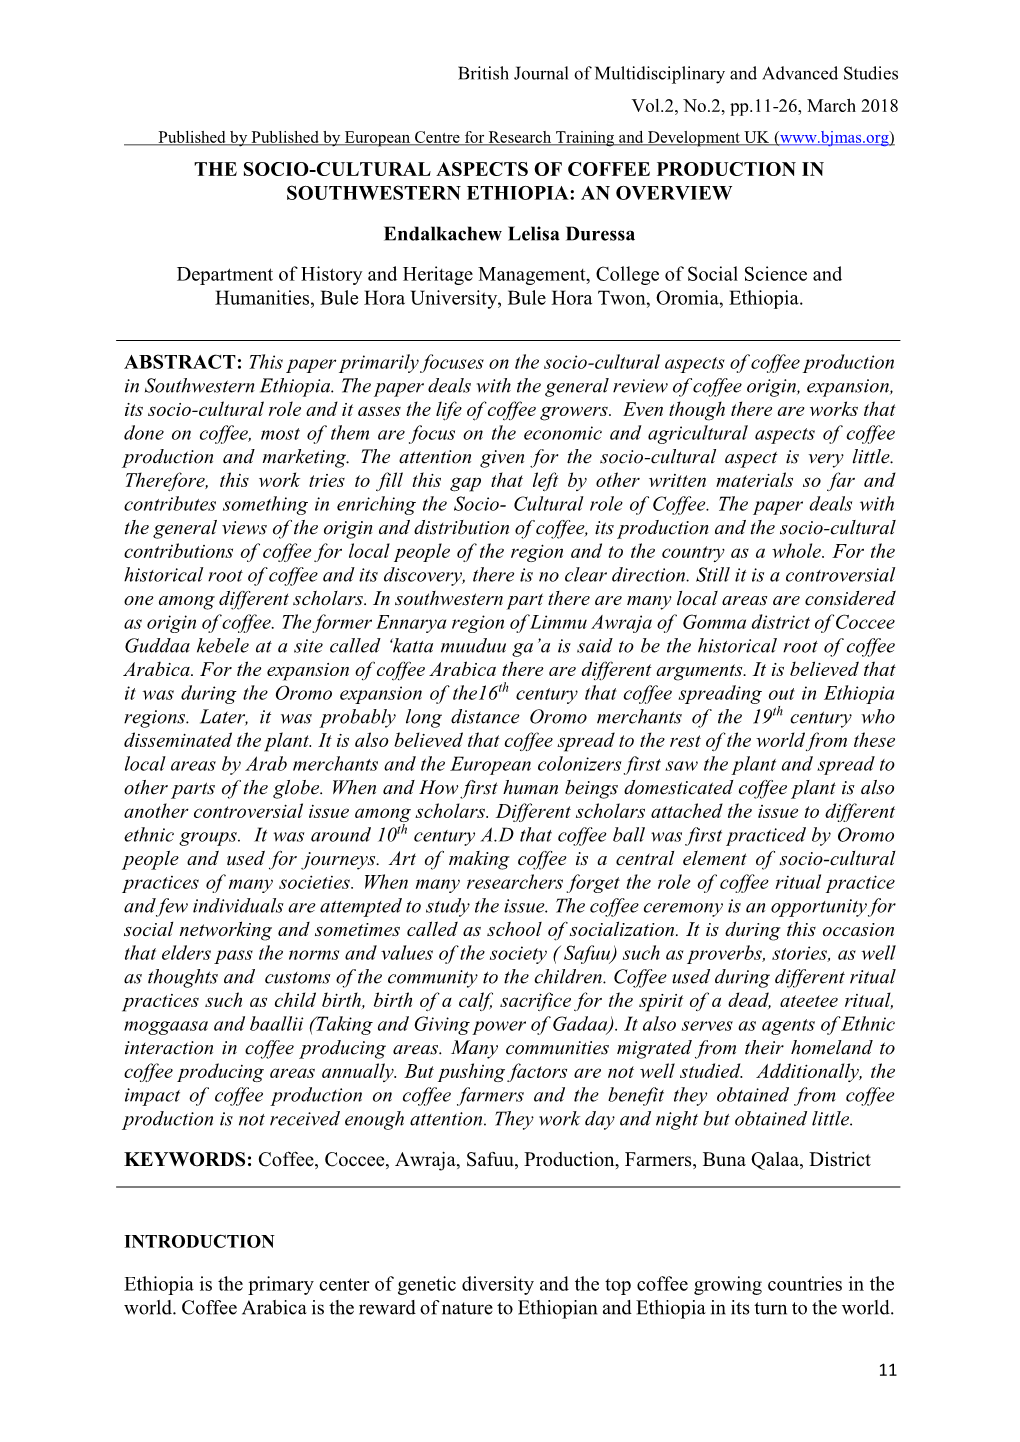 THE SOCIO-CULTURAL ASPECTS of COFFEE PRODUCTION in SOUTHWESTERN ETHIOPIA: an OVERVIEW Endalkachew Lelisa Duressa Department of H